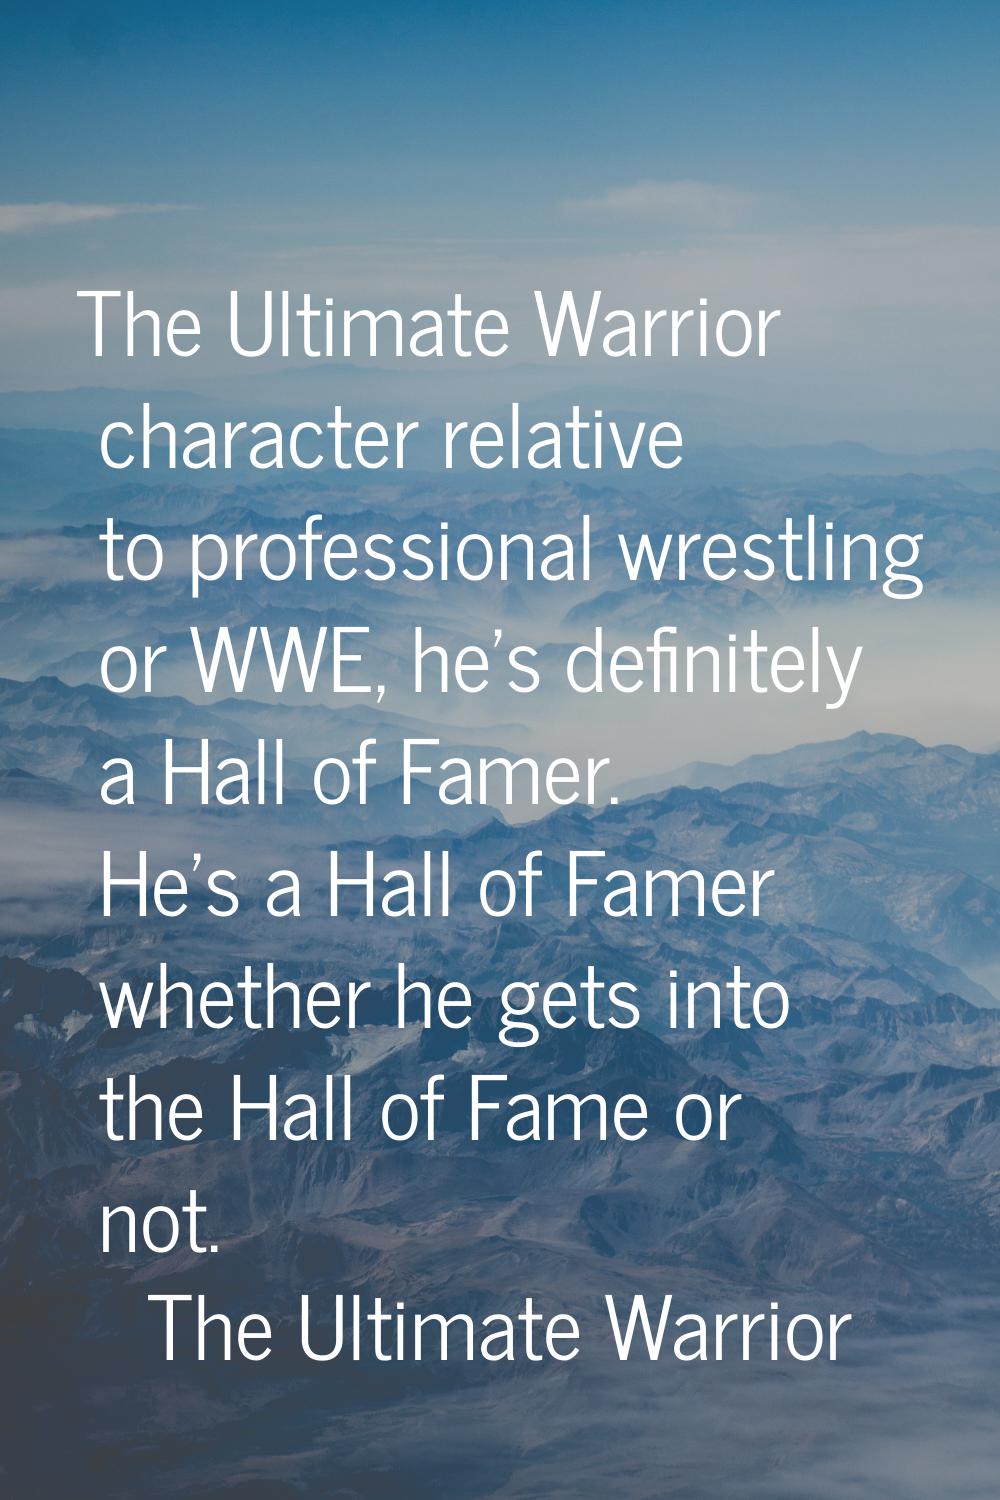 The Ultimate Warrior character relative to professional wrestling or WWE, he's definitely a Hall of